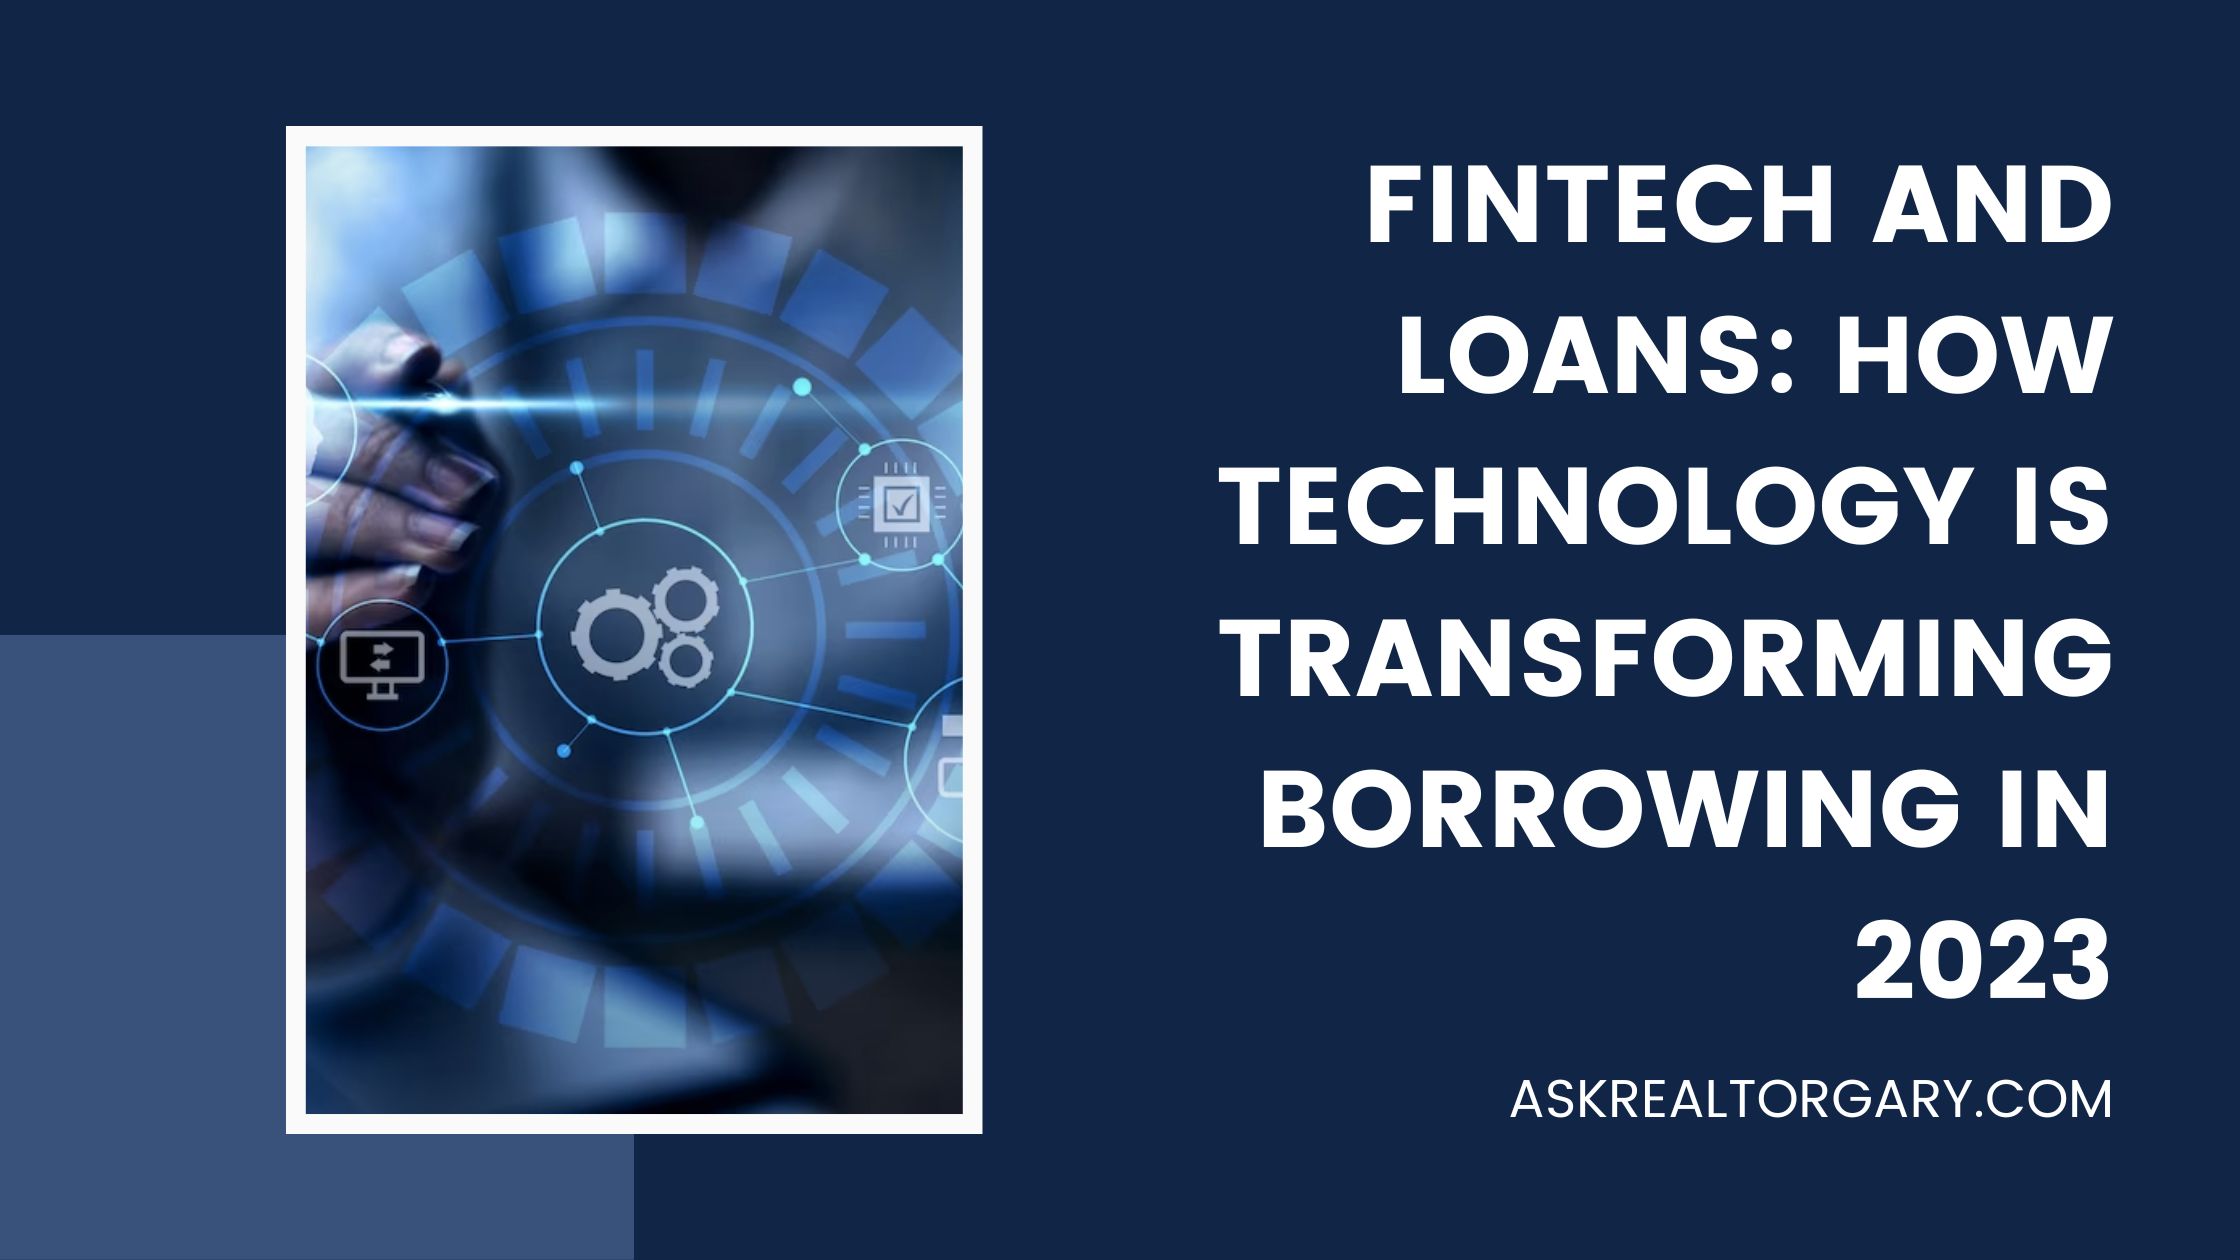 Fintech and Loans: How Technology is Transforming Borrowing in 2023